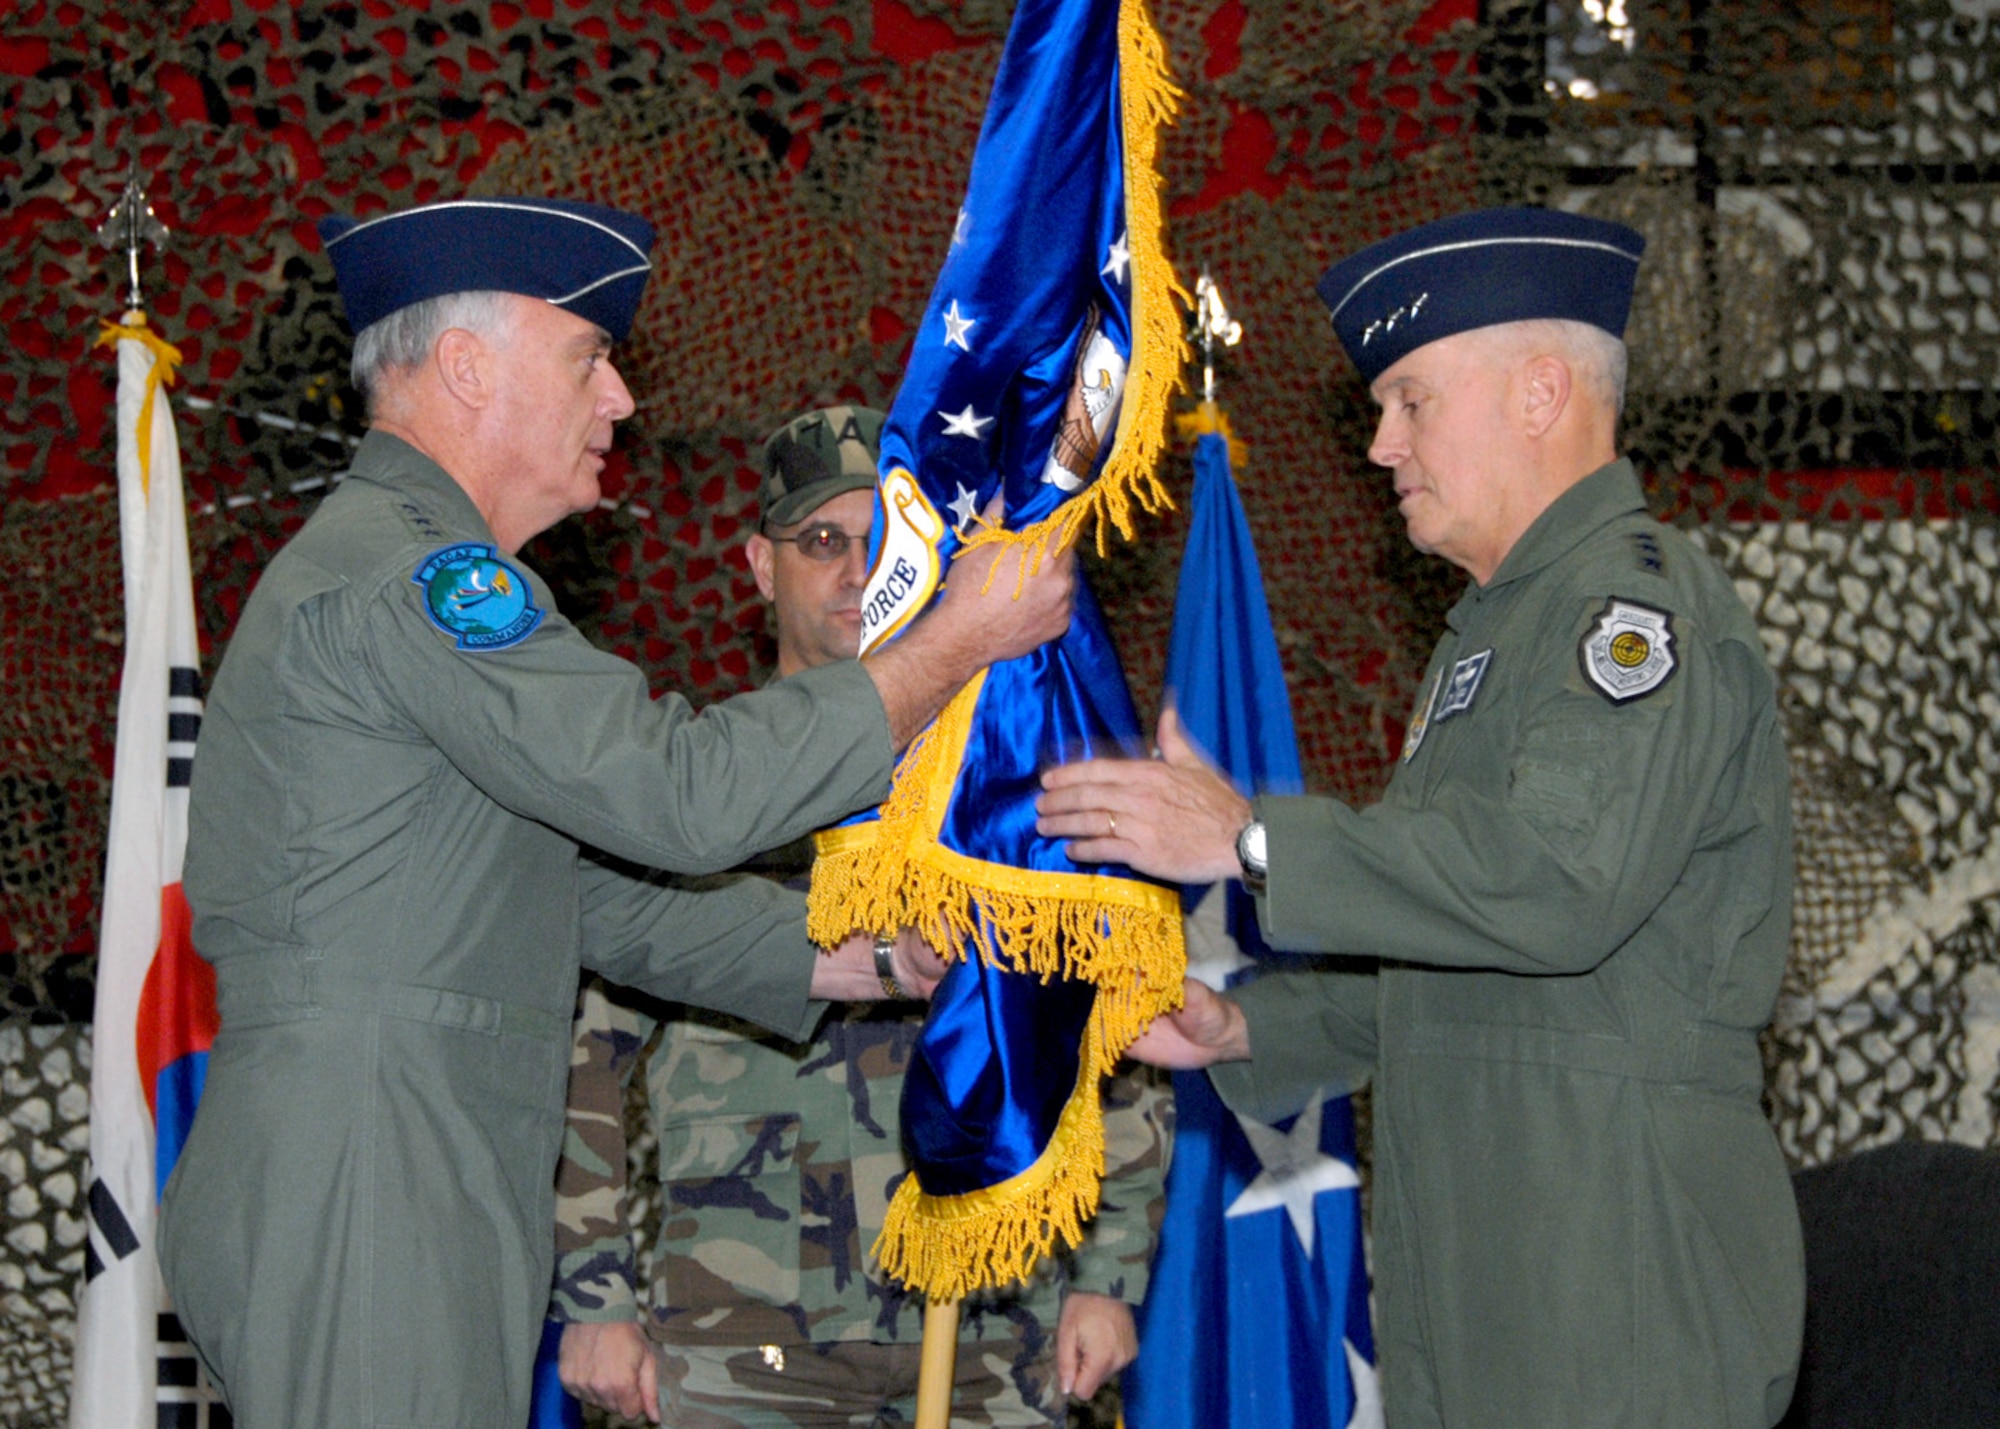 OSAN AIR BASE, Republic of Korea -- (L to R) General Carrol H. “Howie” Chandler, Pacific Air Forces commander, passes the new Seventh Air Force (Air Forces Korea) guidon to Lt. Gen. Stephen G. Wood, Seventh Air Force (Air Forces Korea) commander, during the Seventh Air Force Re-designation Ceremony Jan. 30 in the 5th Reconnaissance Squadron hangar. This ceremony marks the implementation of the Chief of Staff of the Air Force's direction to establish an Air Force component organization that is structured to operate and train every day in its wartime configuration.  These warfighting organizations are being stood up around the globe to enable the effective command and control of air, space, and cyberspace forces conducting missions across the spectrum of military operations.  The new Seventh Air Force (Air Forces Korea) organization will provide the United States Forces Korea commander with critical air component capabilities, ensuring a key element of joint and combined operations on the Korean peninsula.  (U.S. Air Force photo/Staff Sgt. Lakisha Croley)